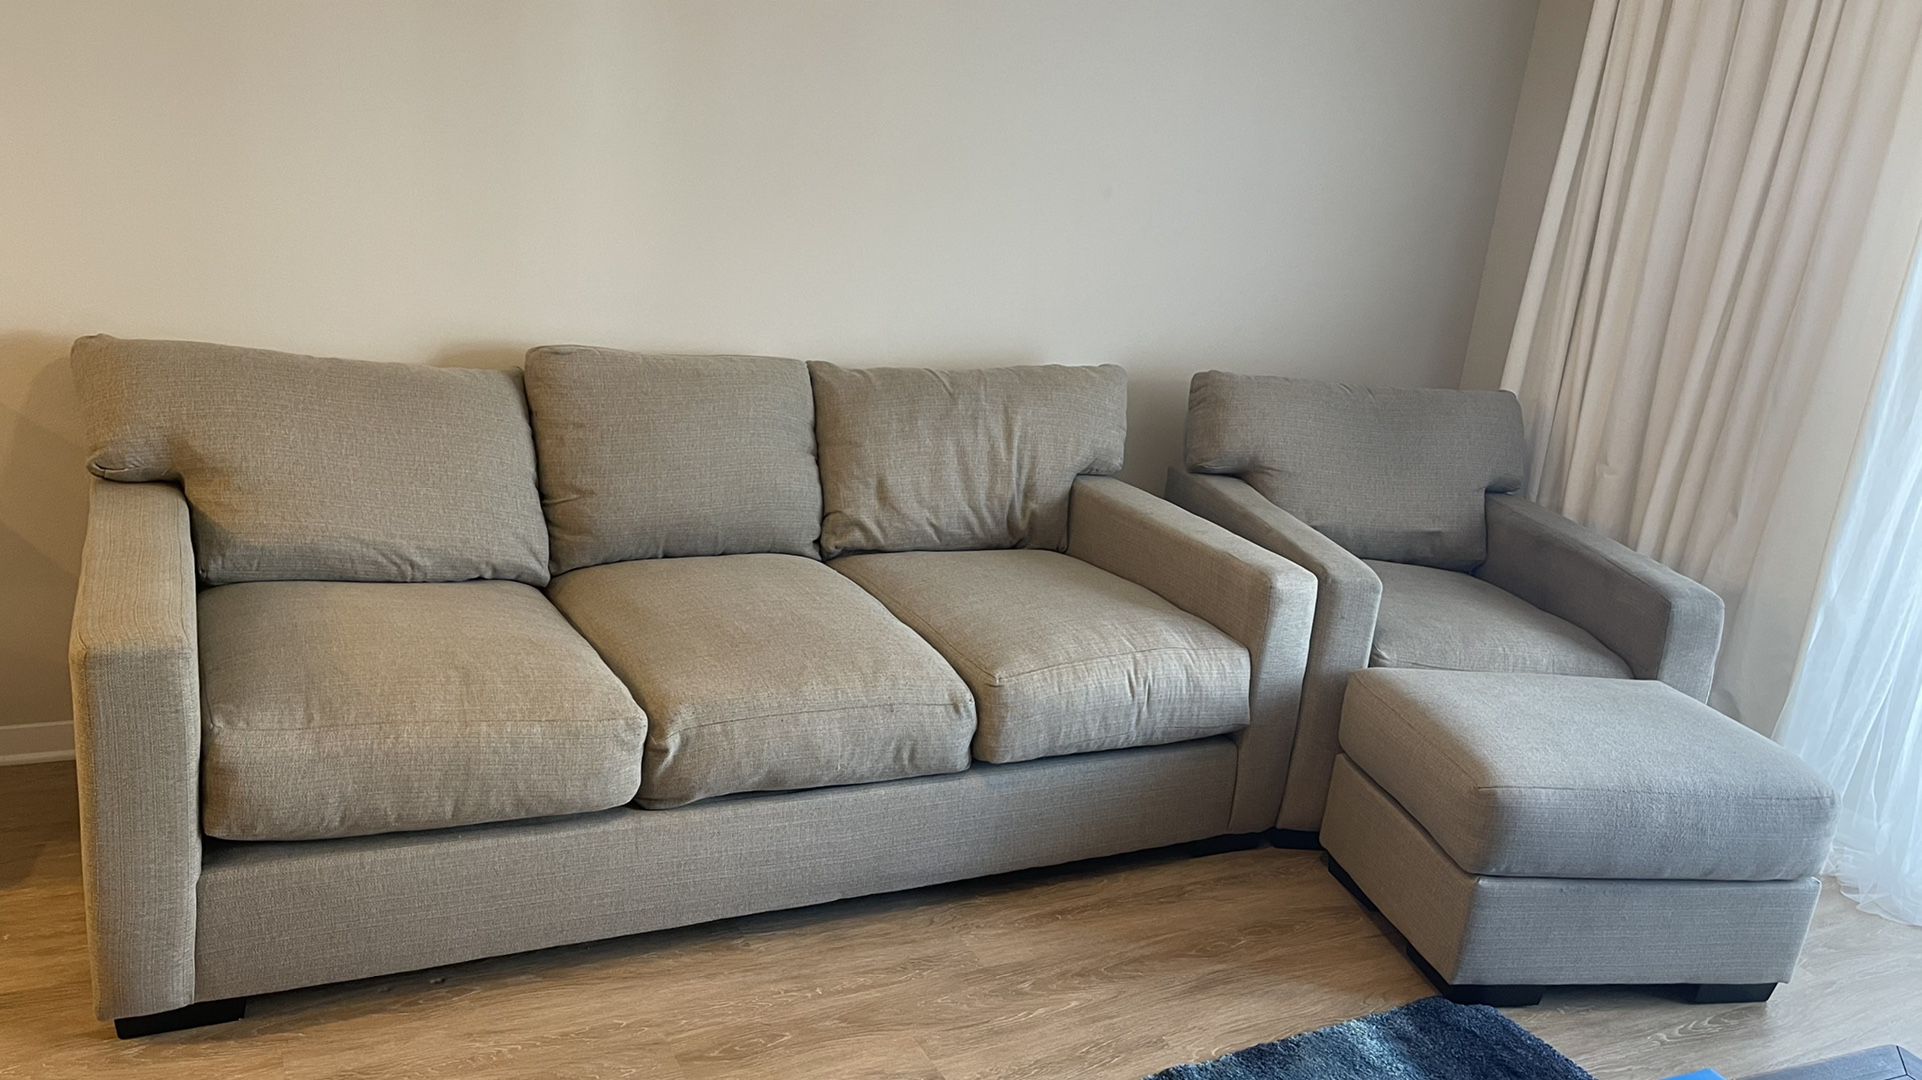 4-piece Gray/Tan Couch Set